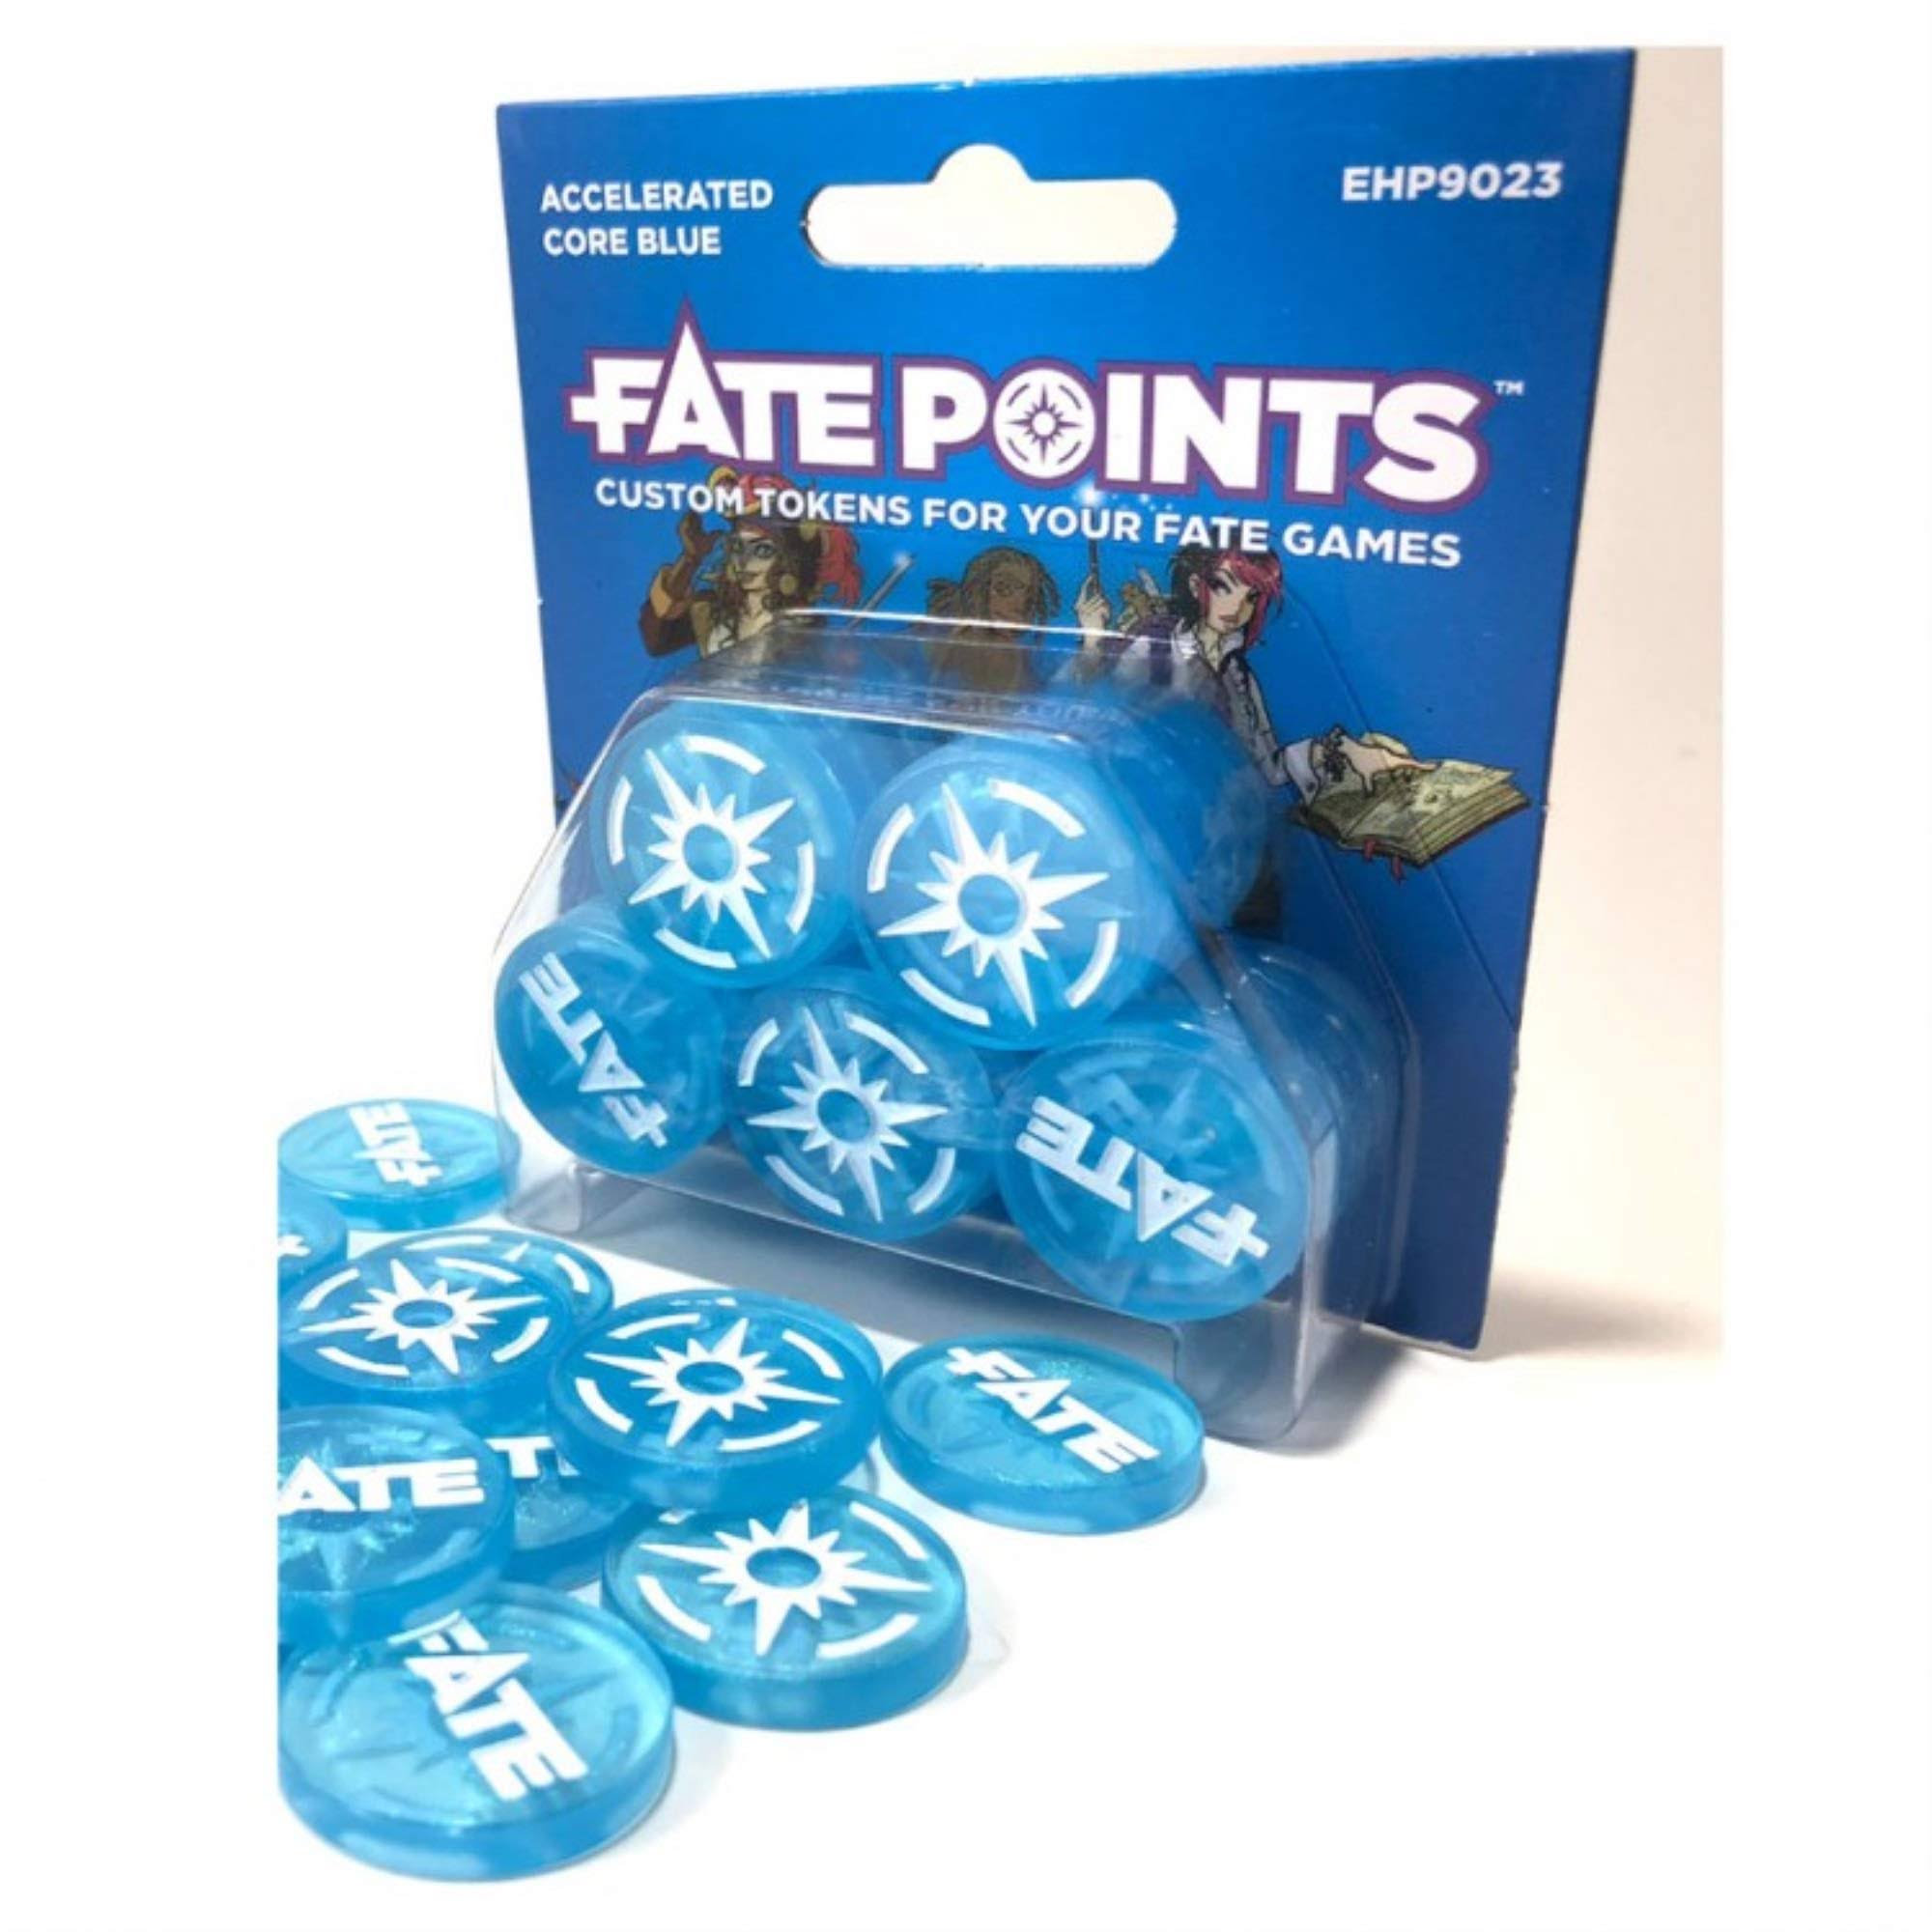 Fate Points: Accelerated Core Blue Fate Games Custom Token - 30ct